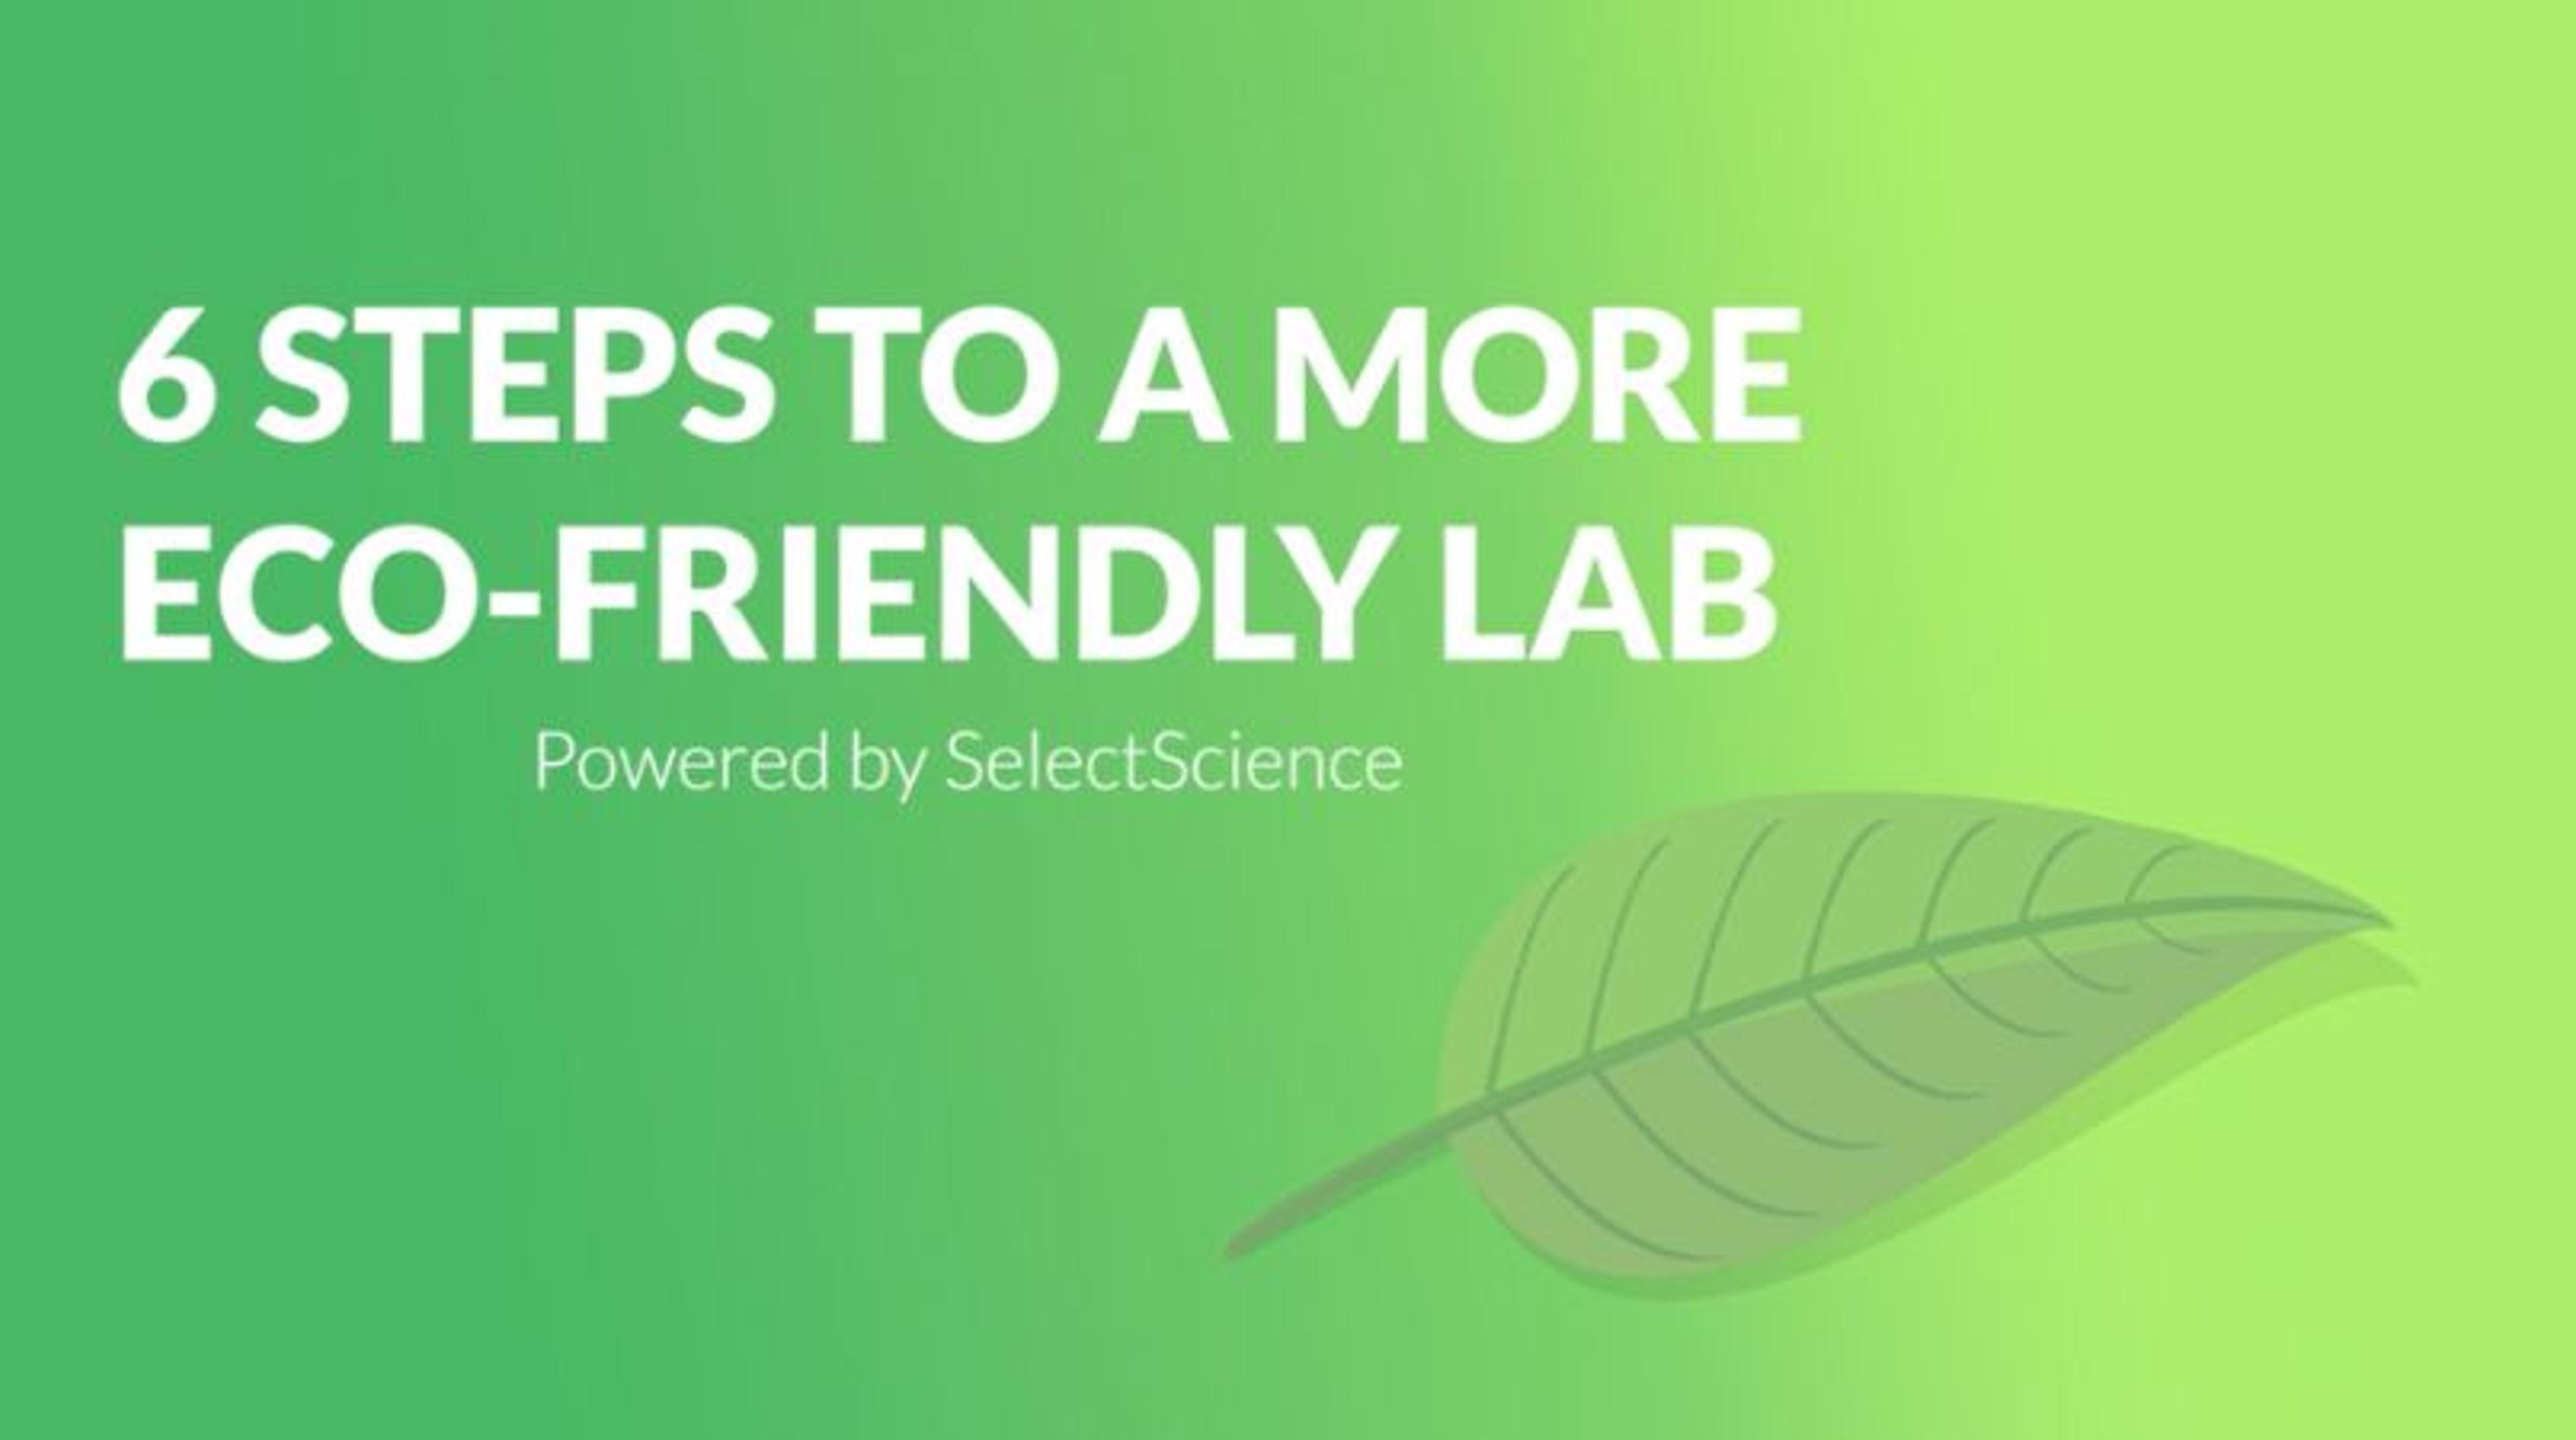 Six simple steps to lab sustainability